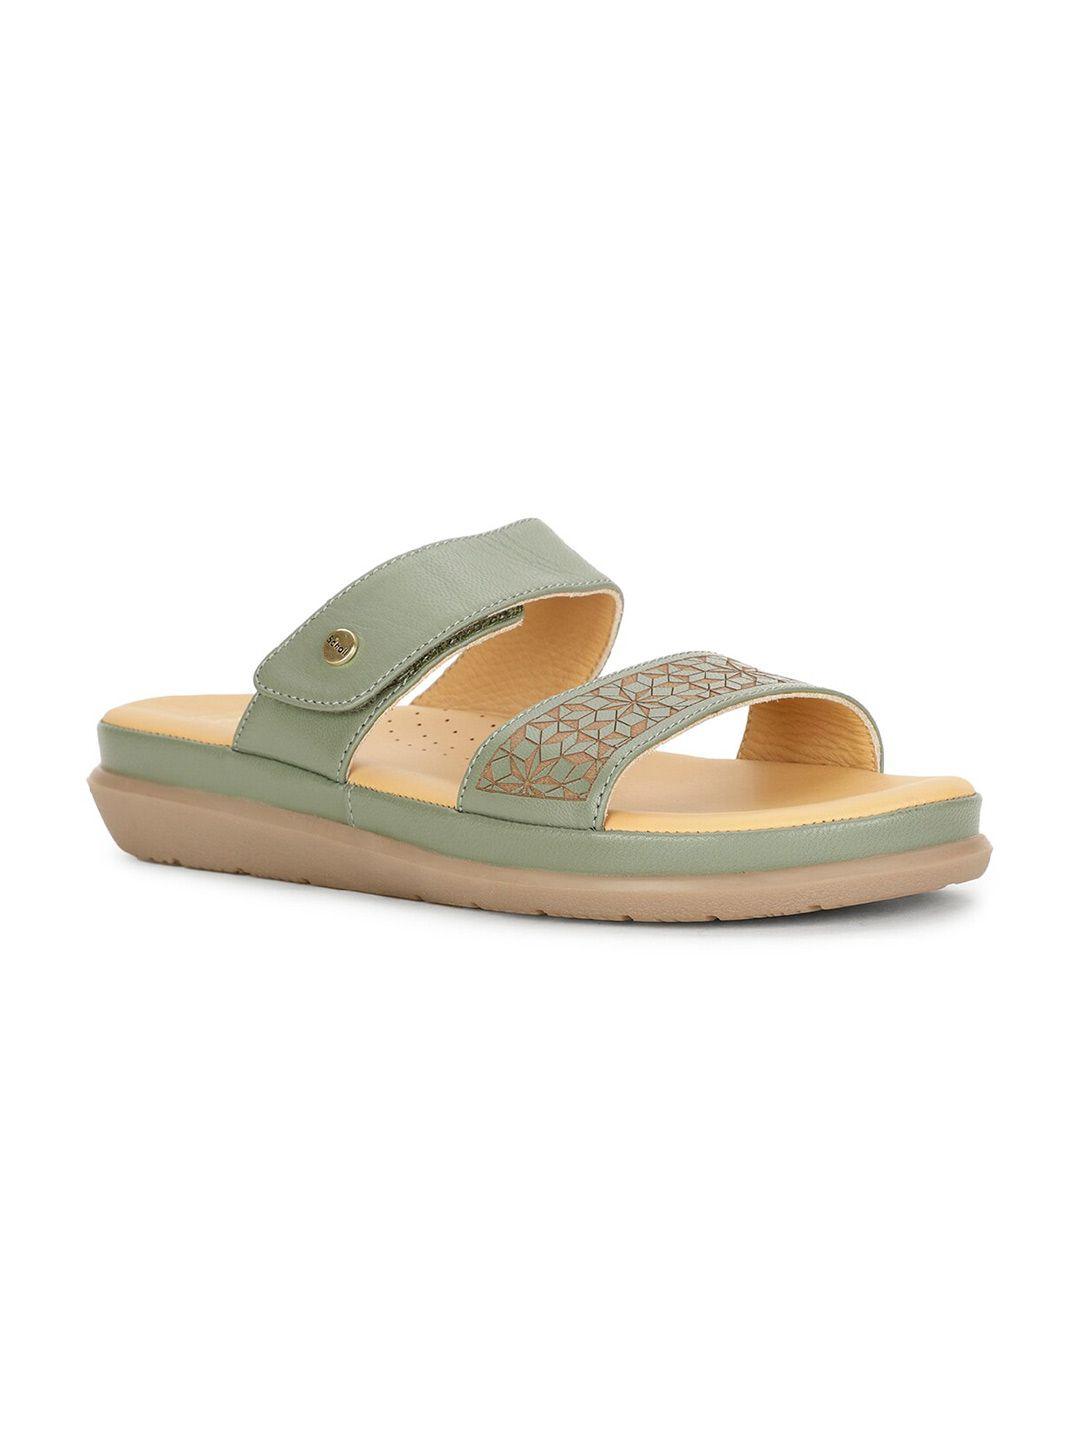 scholl textured leather open toe flats